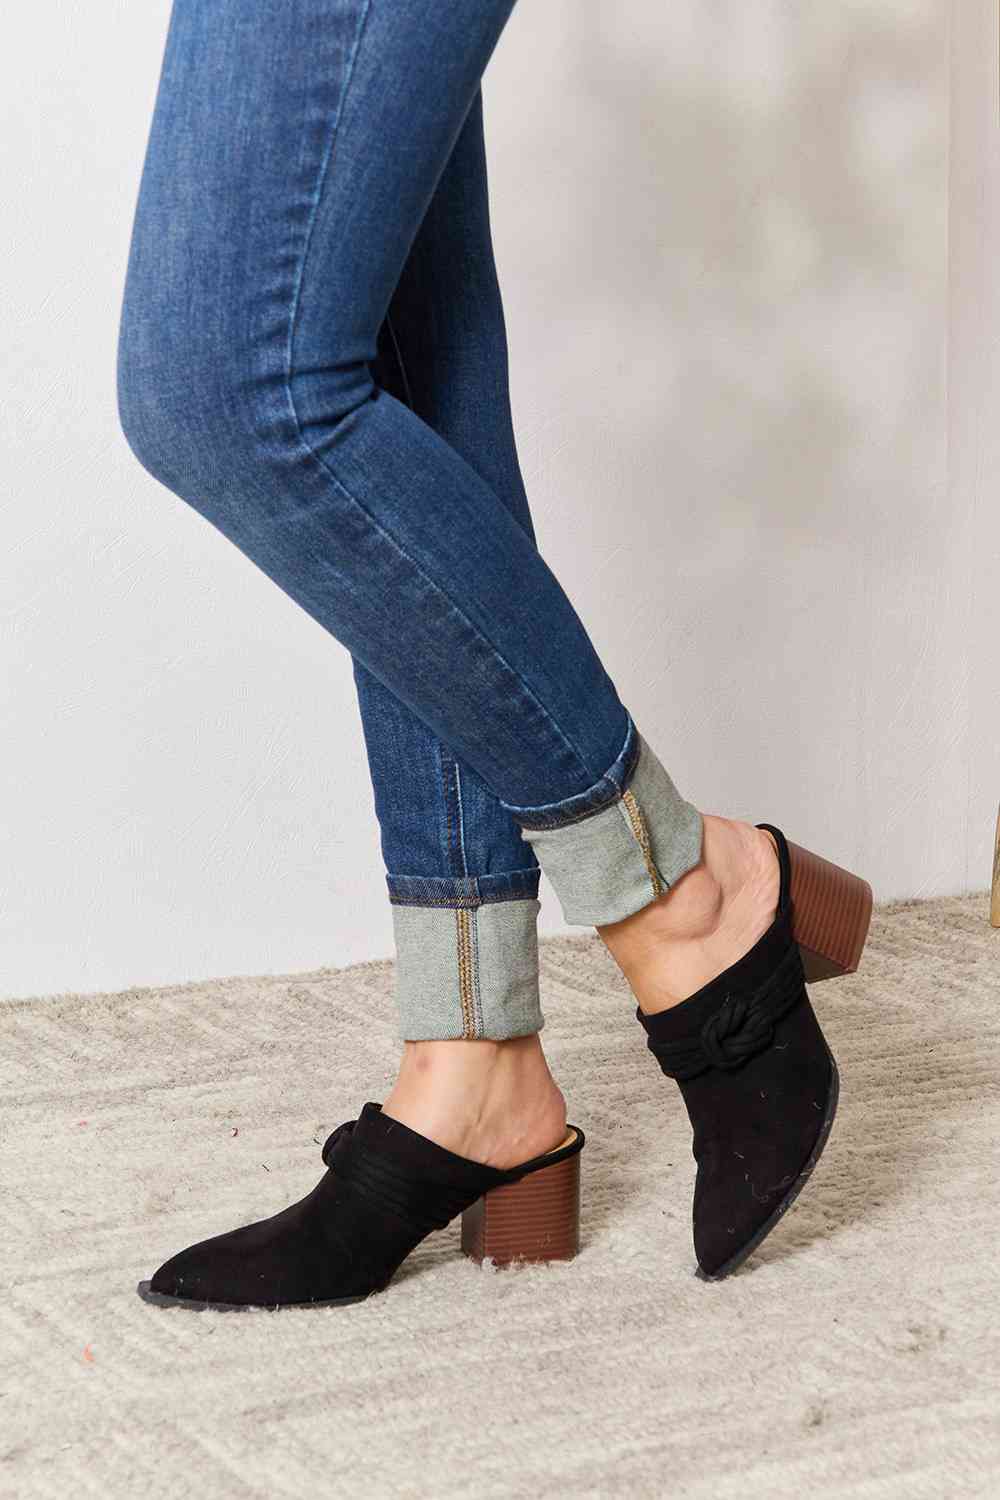 East Lion Corp Pointed-Toe Braided Trim Mules Black